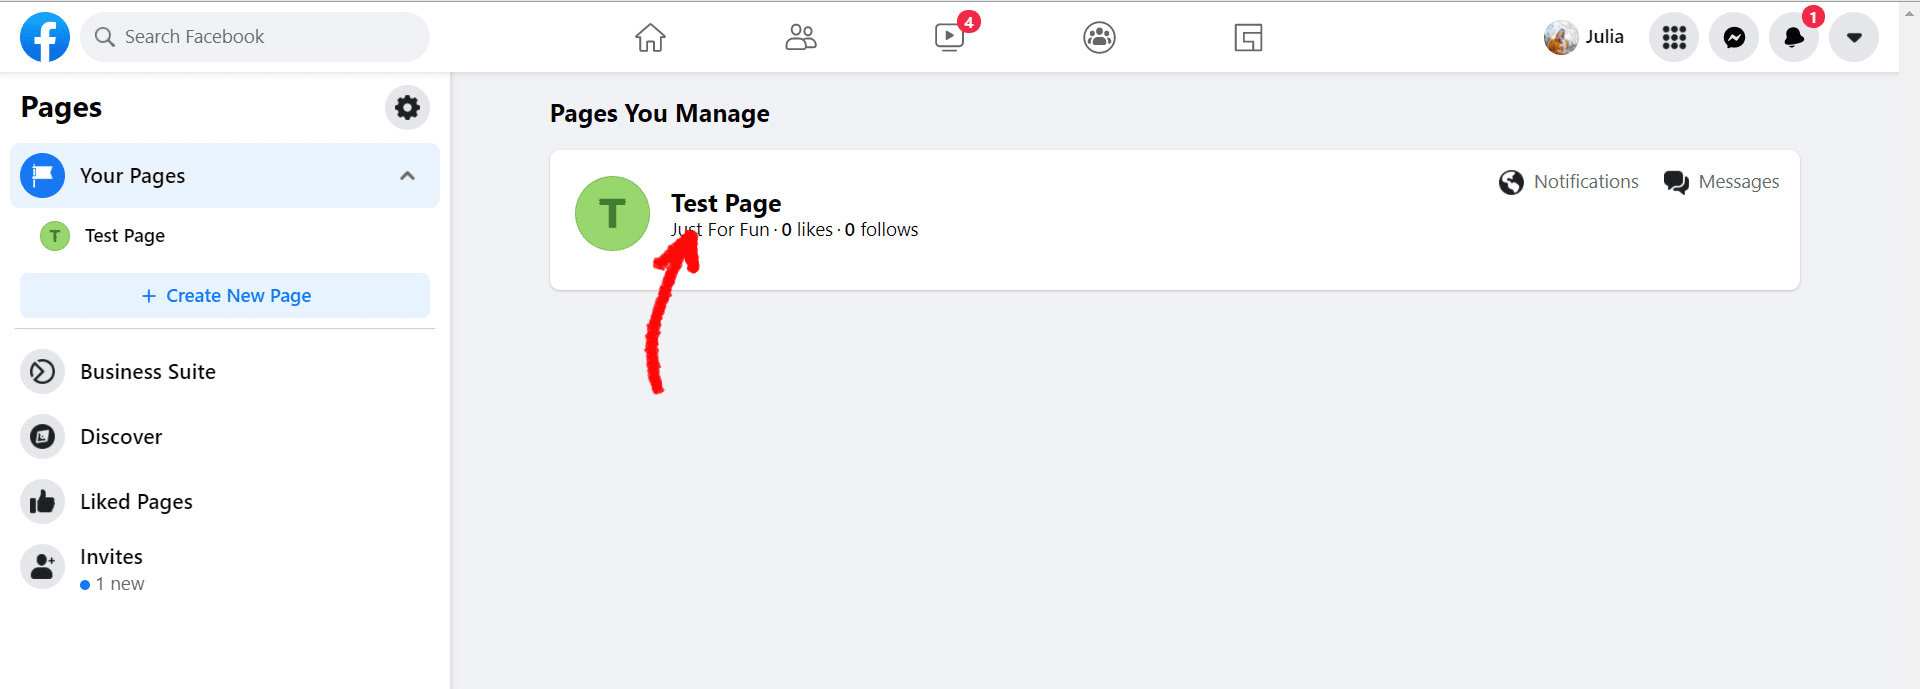 Facebook 'Pages You Manage' button